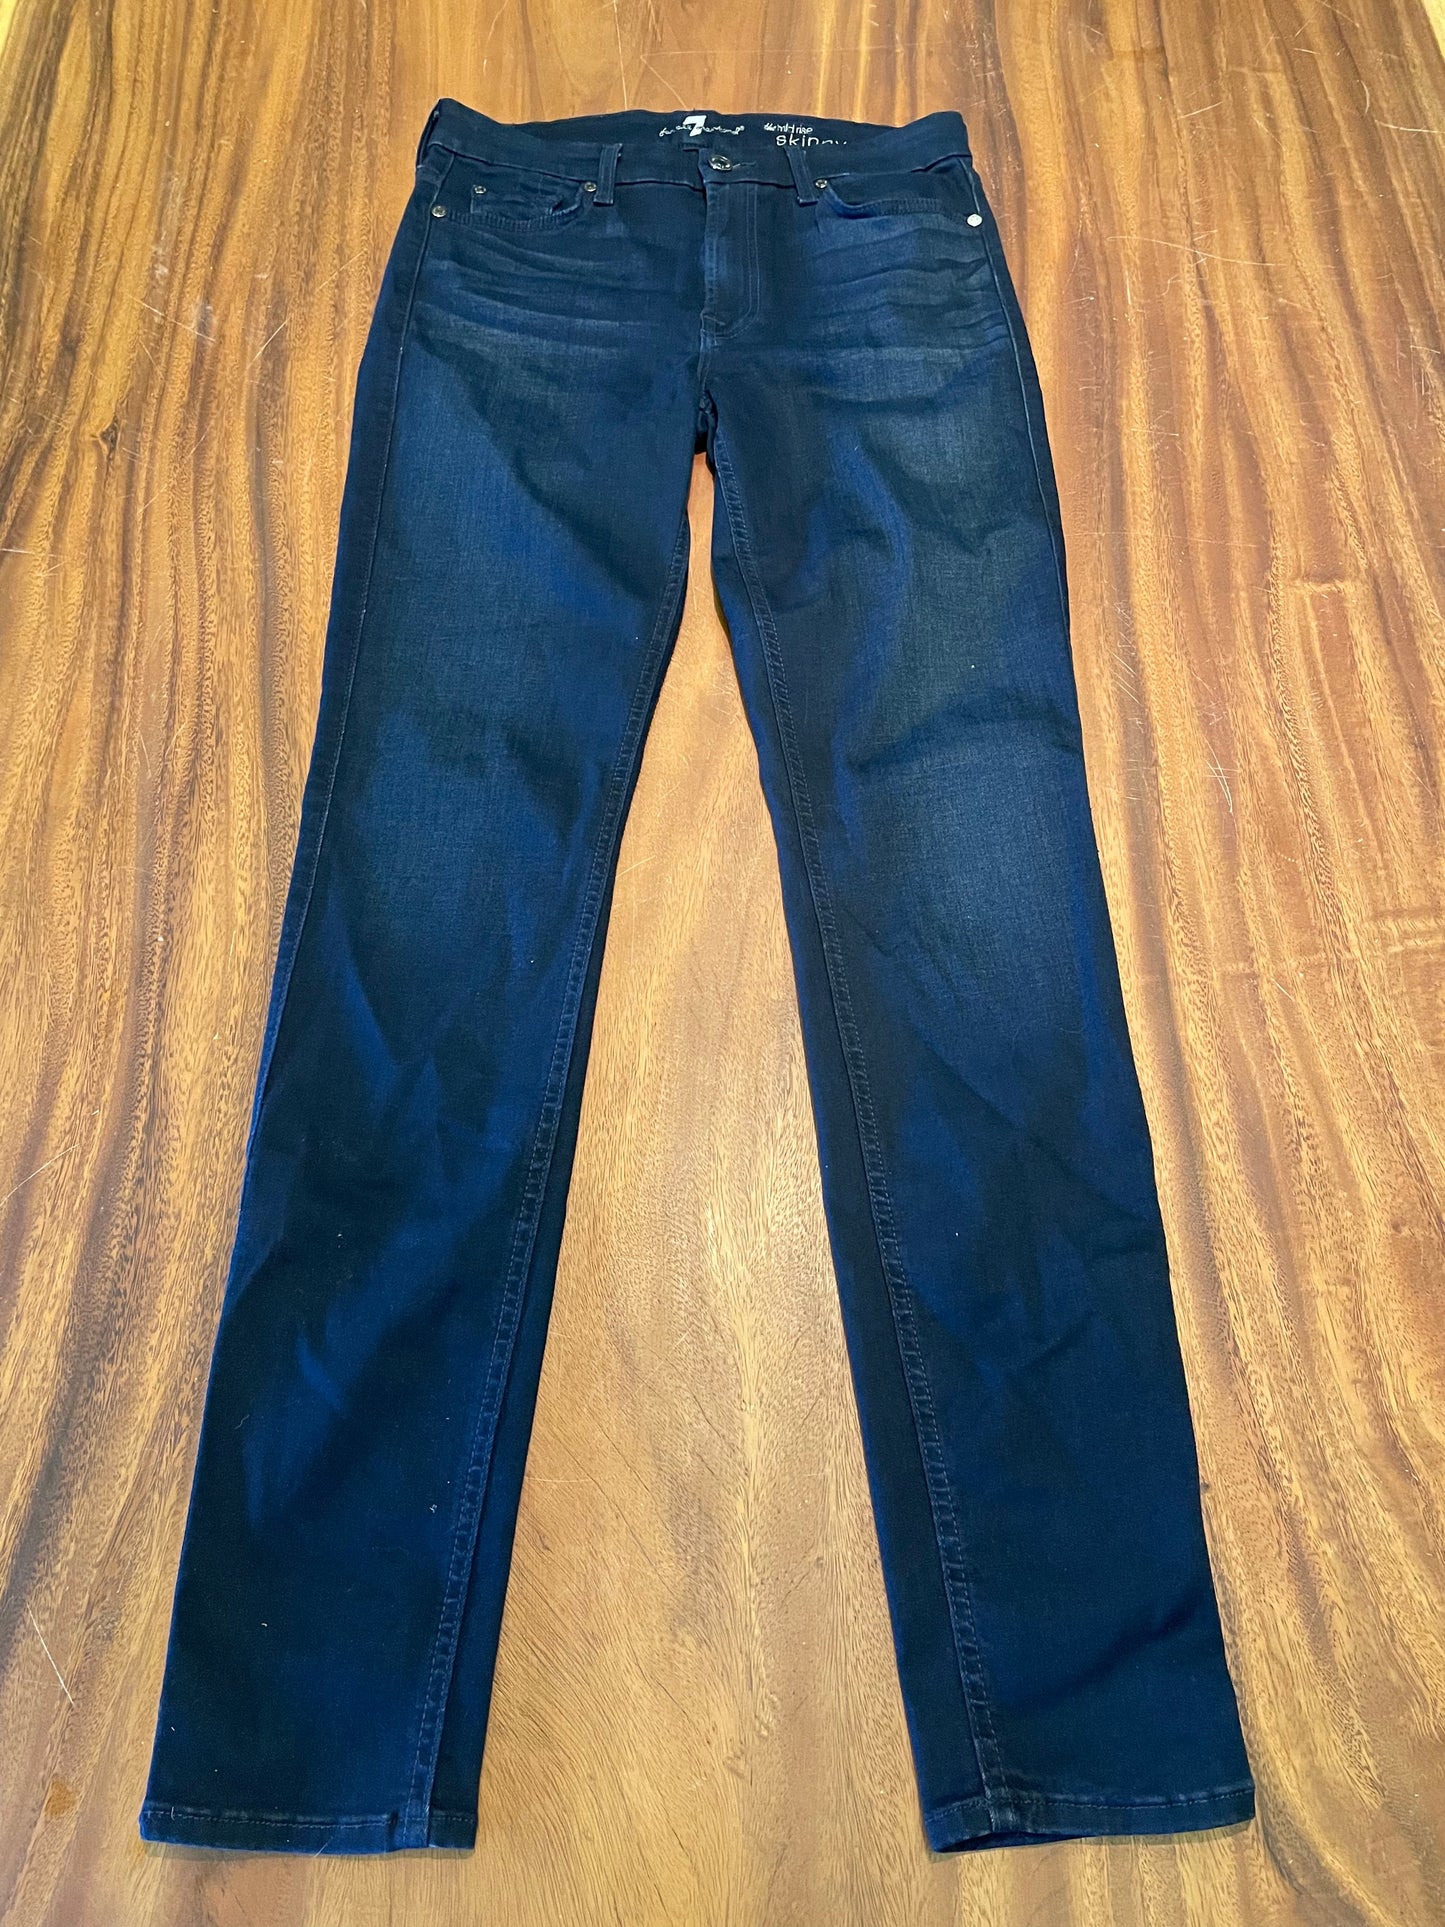 SHADES OF BLUE: Loman's 7 for All Mankind Jeans (36)